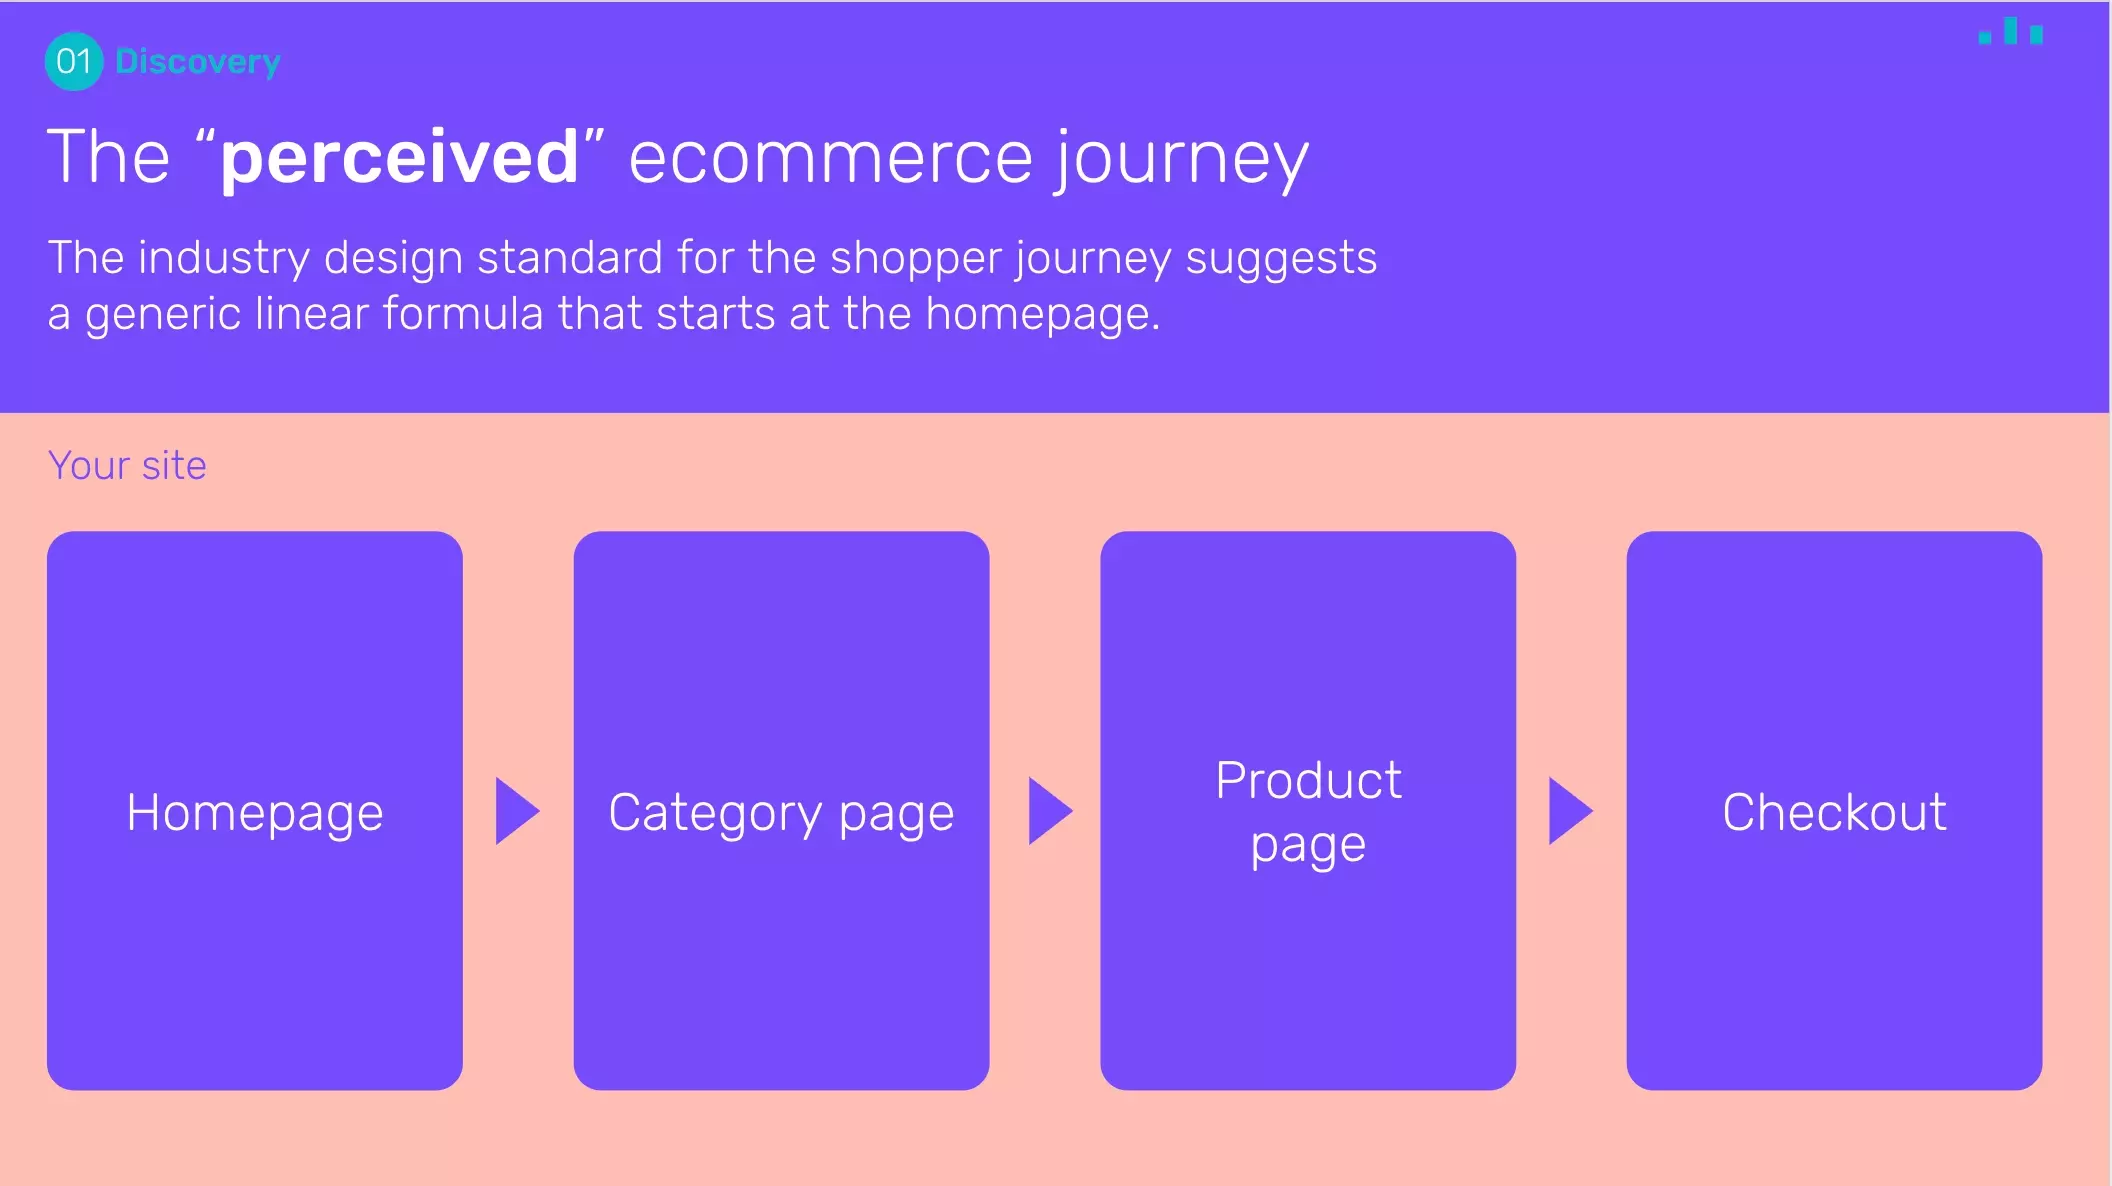 The perceived ecommerce journey. We might think users visit our home page, navigate to the relevant category, choose a product and then checkout.